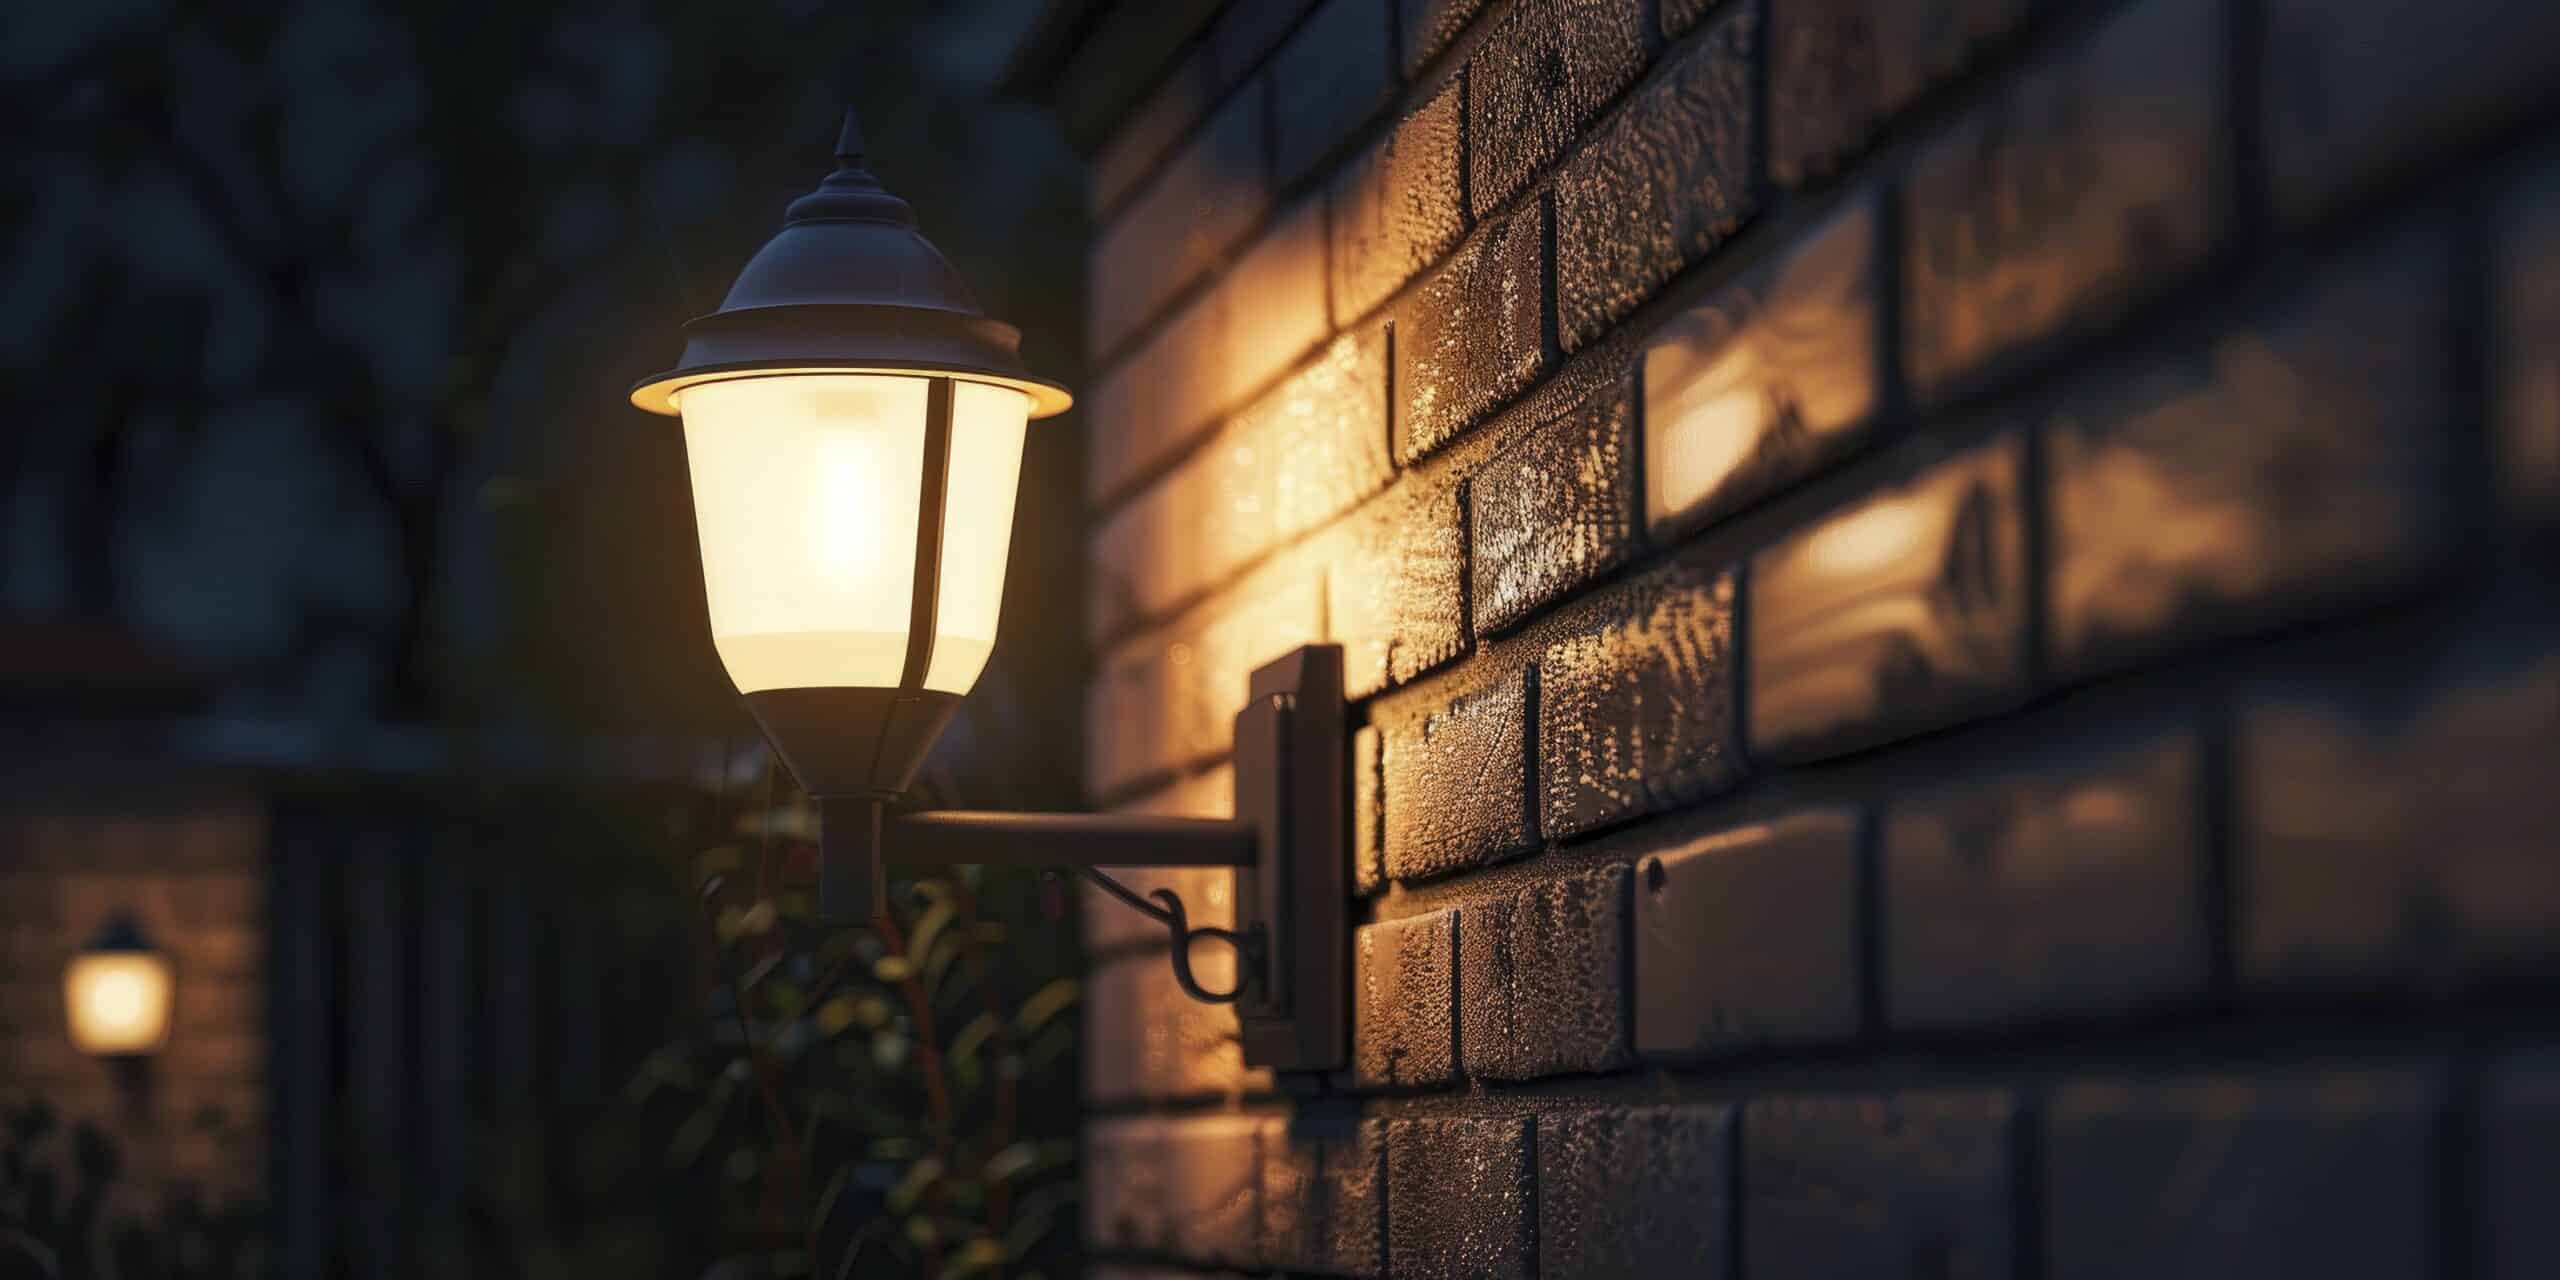 www.appr.com : What steps are needed to change an outdoor light fixture?